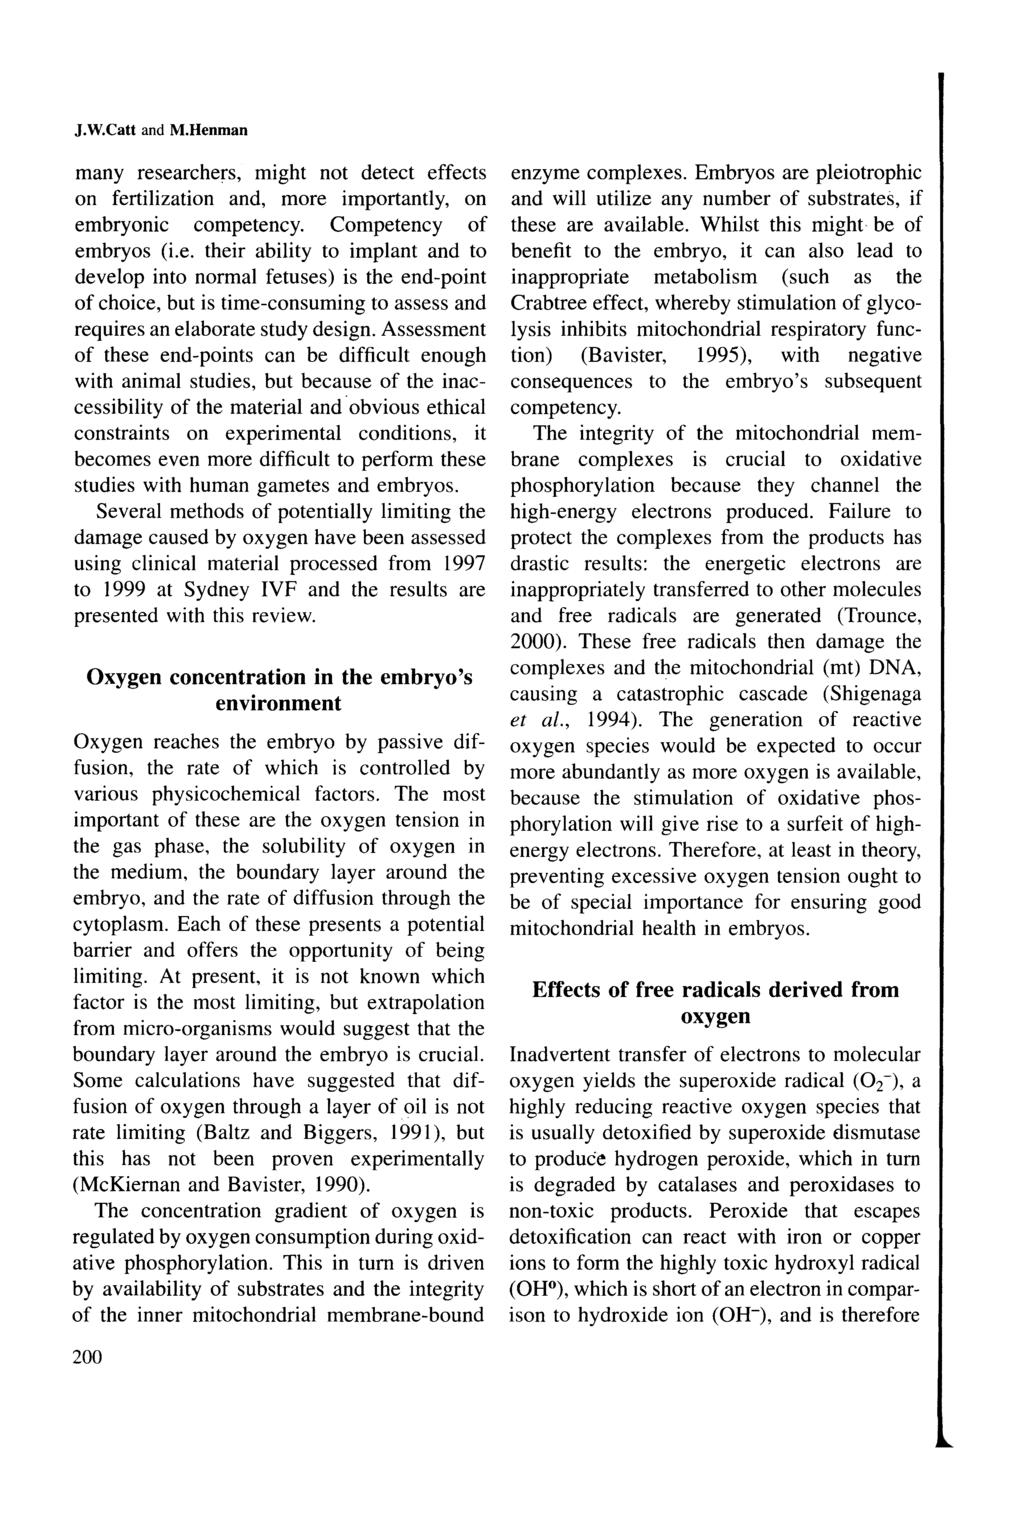 J.W.Catt and M.Henman many researchers, might not detect effects on fertilization and, more importantly, on embryonic competency. Competency of embryos (i.e. their ability to implant and to develop into normal fetuses) is the end-point of choice, but is time-consuming to assess and requires an elaborate study design.